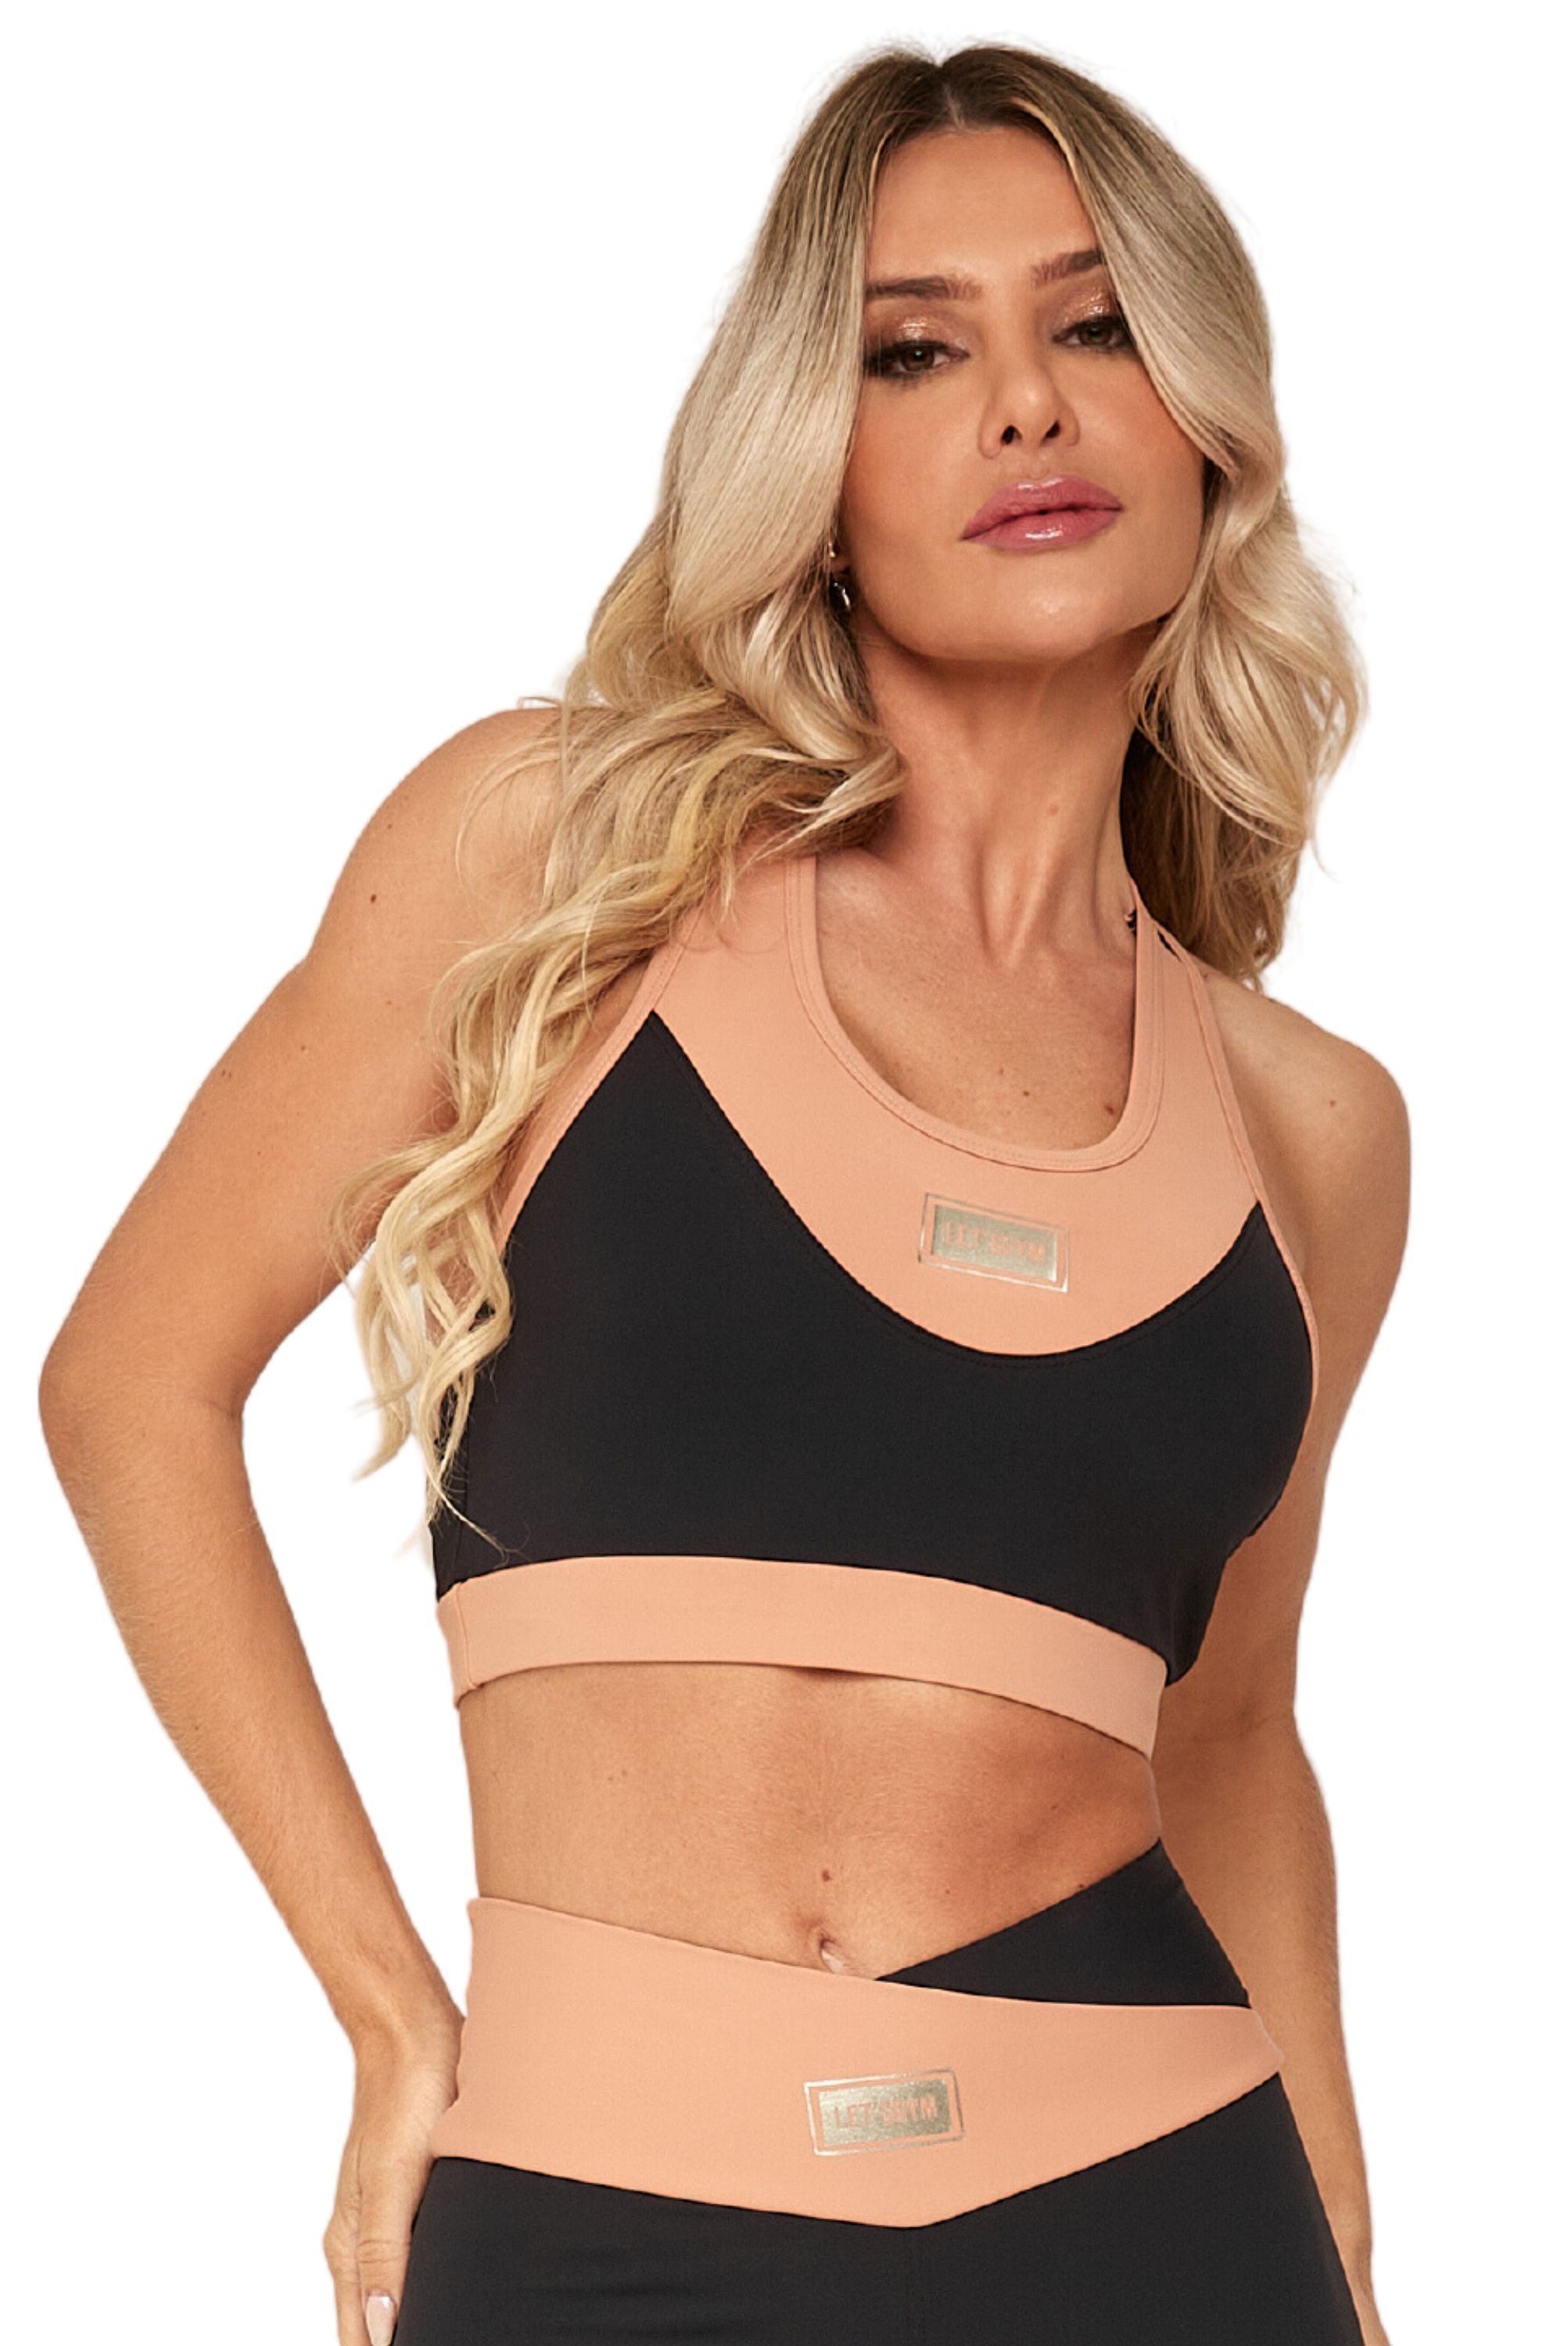 Action Sports Bra – Usay Buy